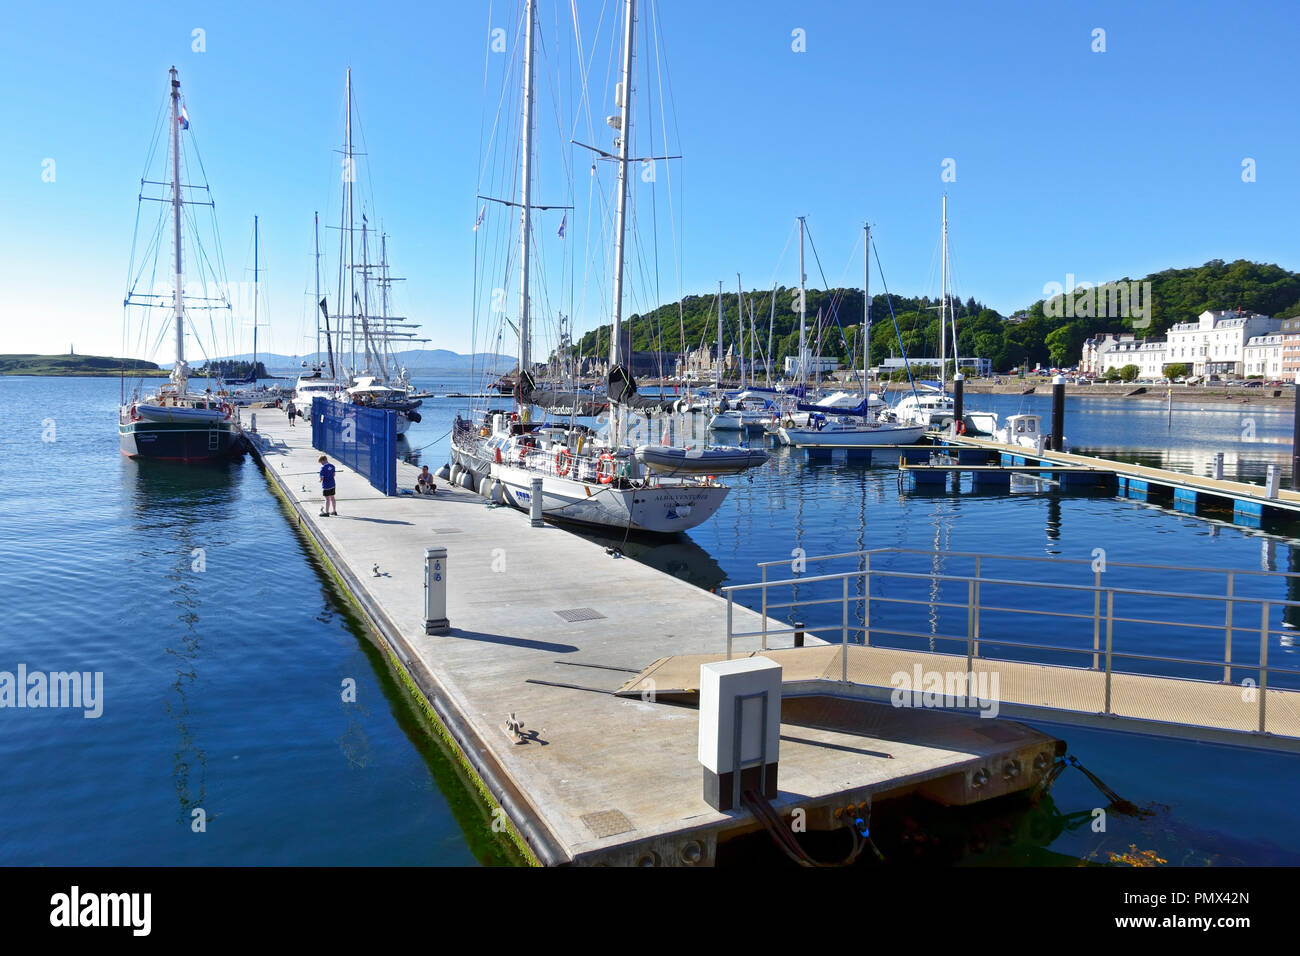 Yachts moored at the North Pier pontoons in Oban, Argyll & Bute, Scotland Stock Photo